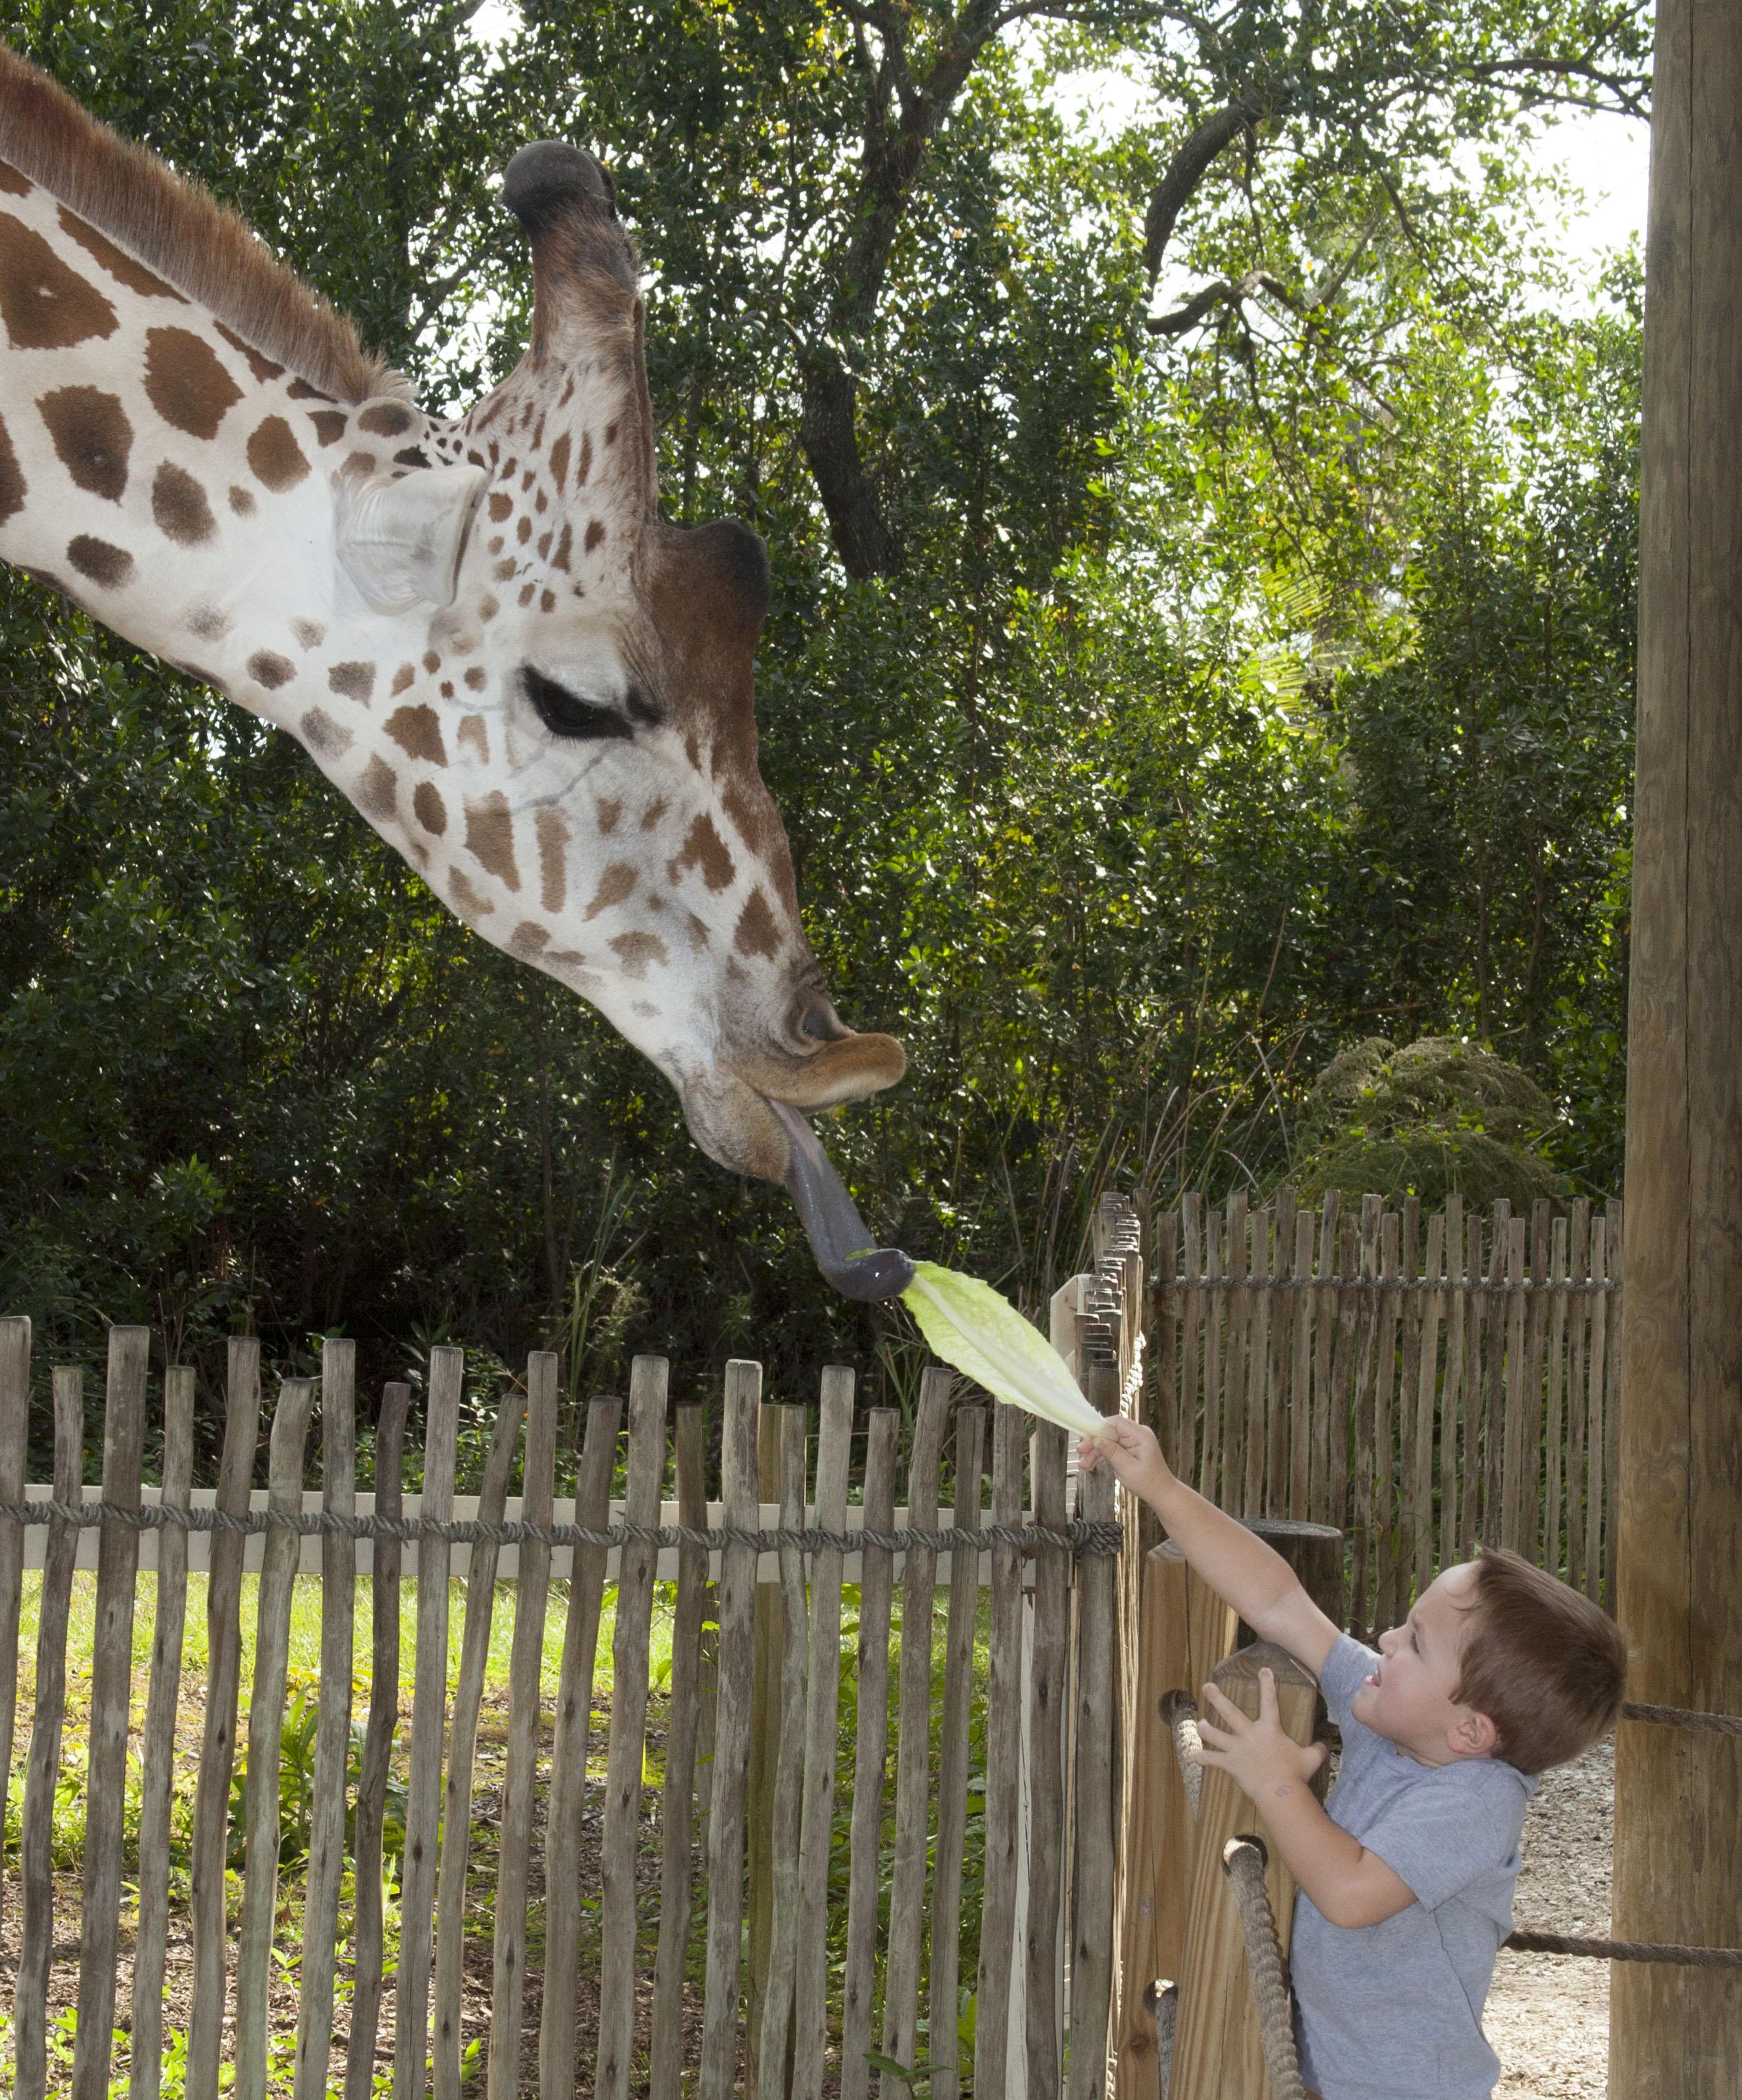 A young guest and giraffe share a moment together during the hand-feeding experience.